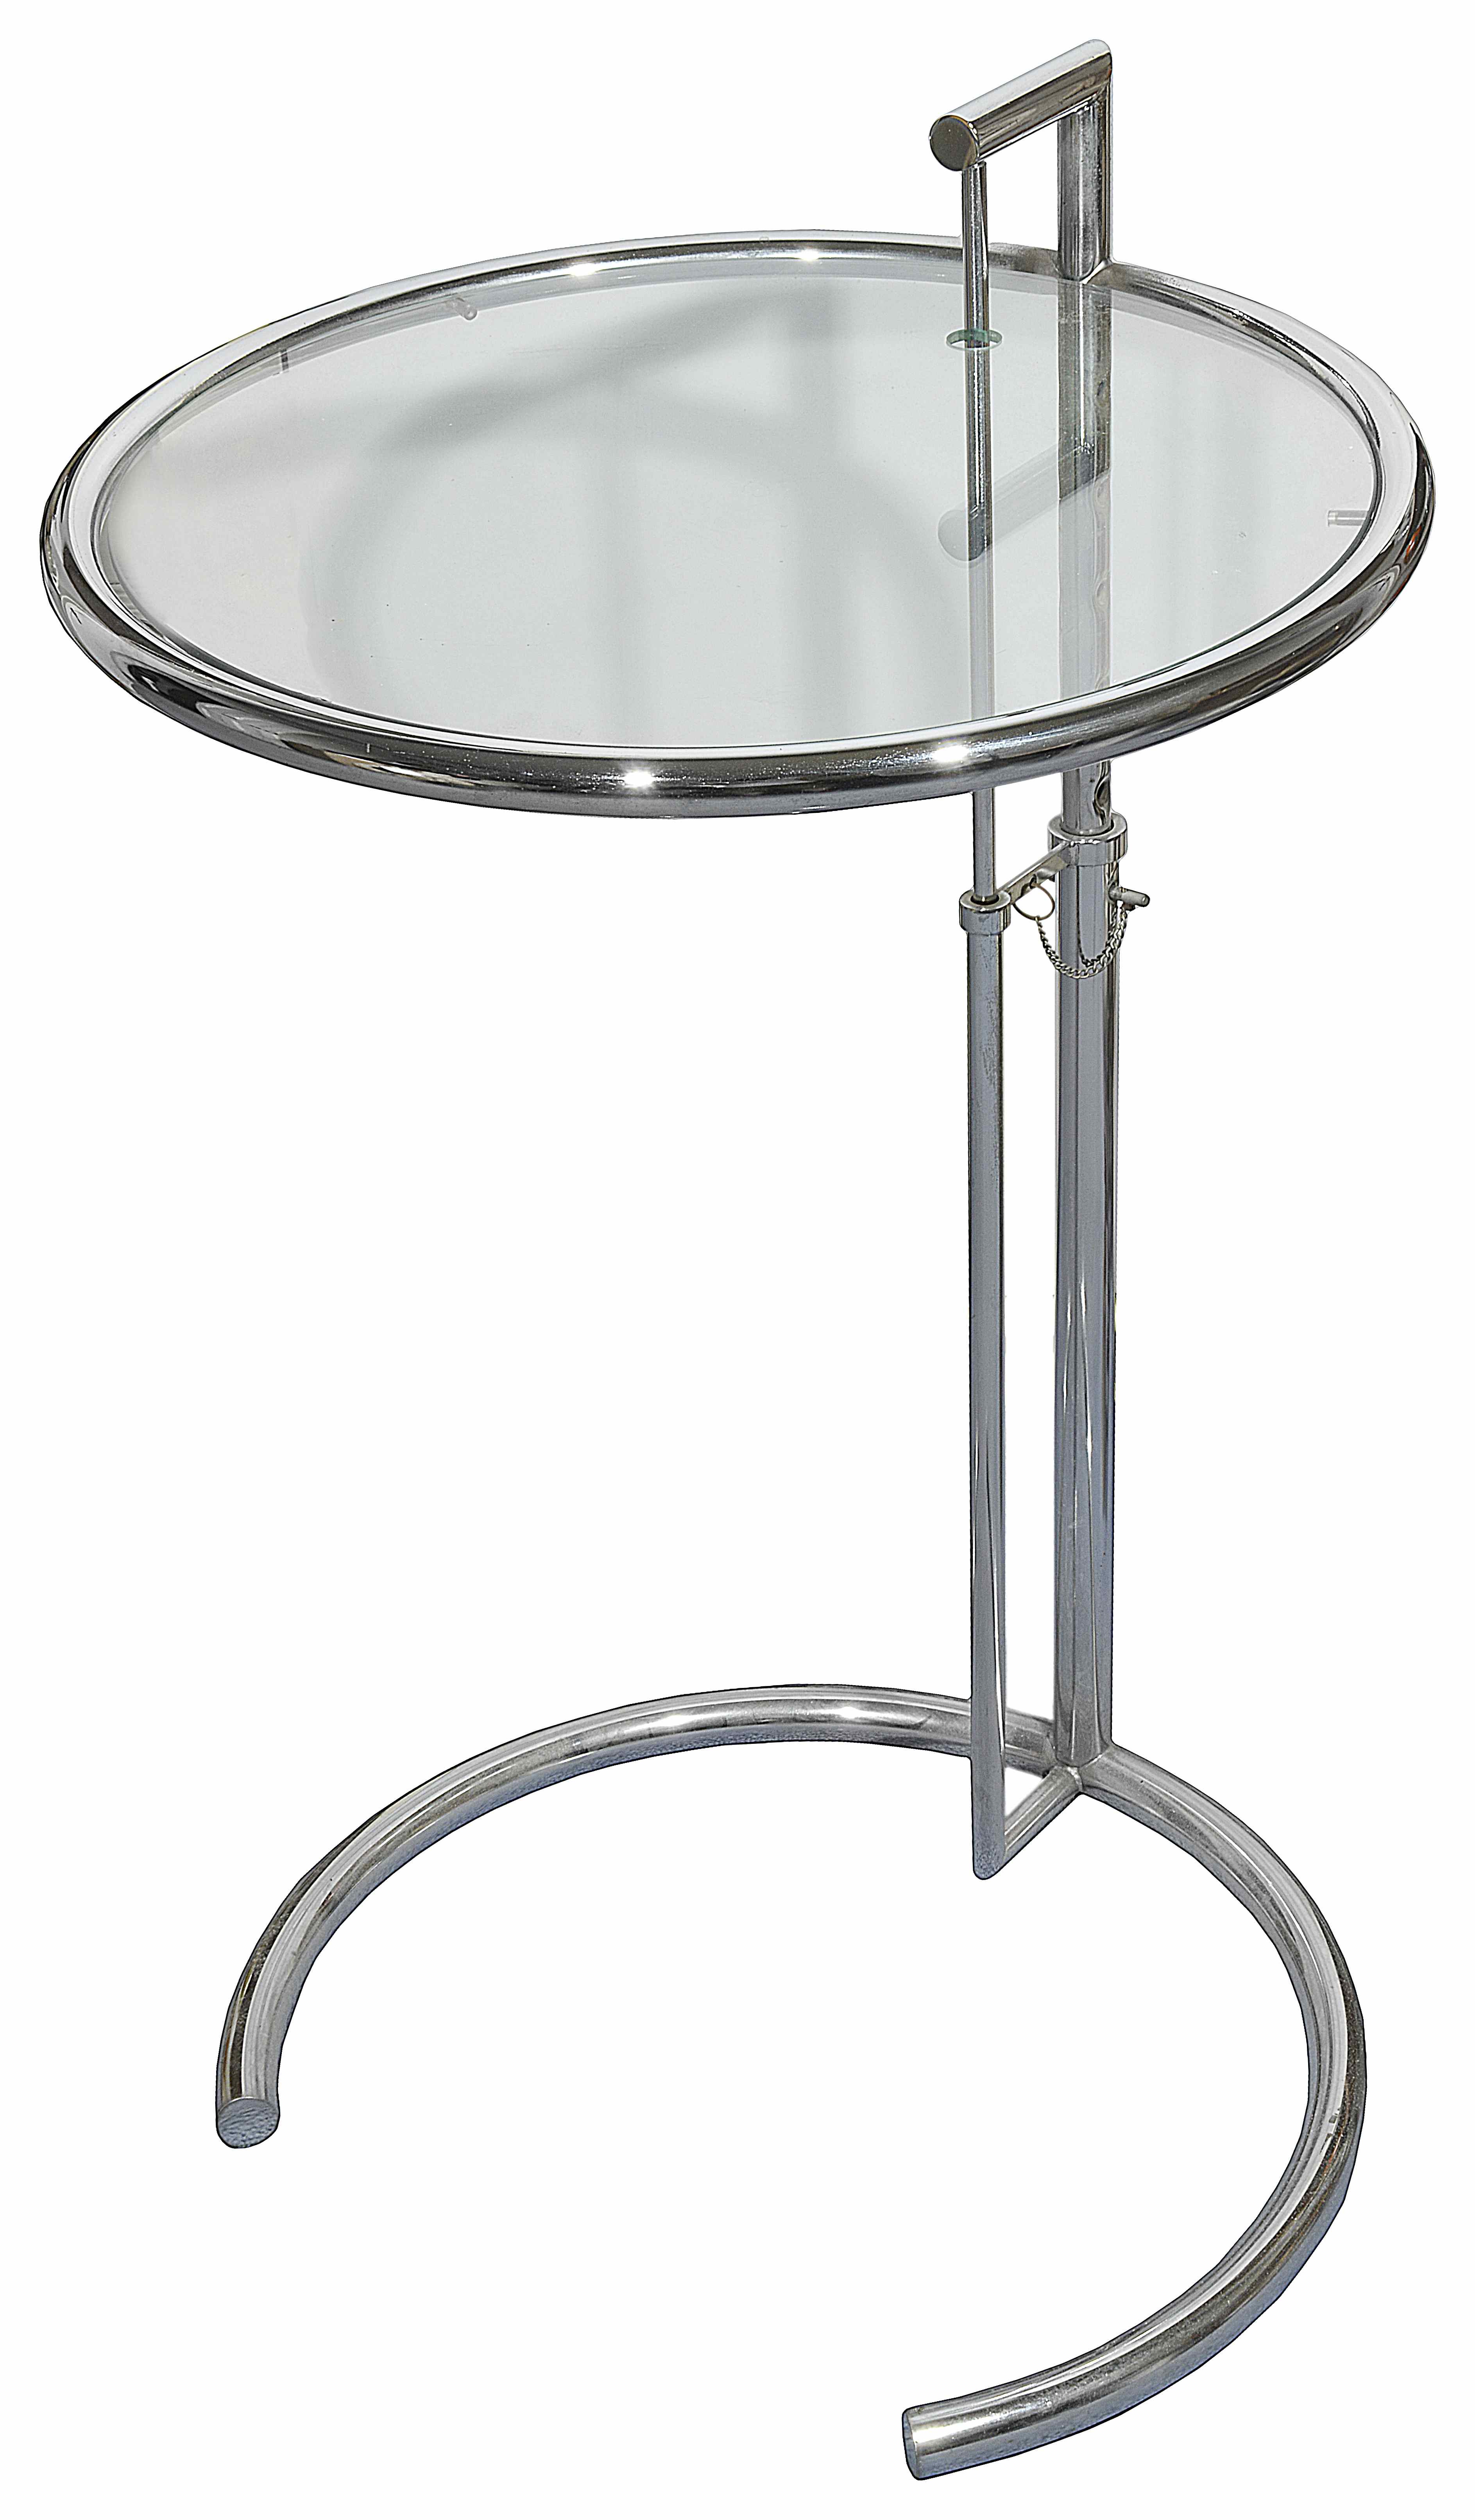 An Eileen Gray style adjustable chrome and glass table the table top of circular form with